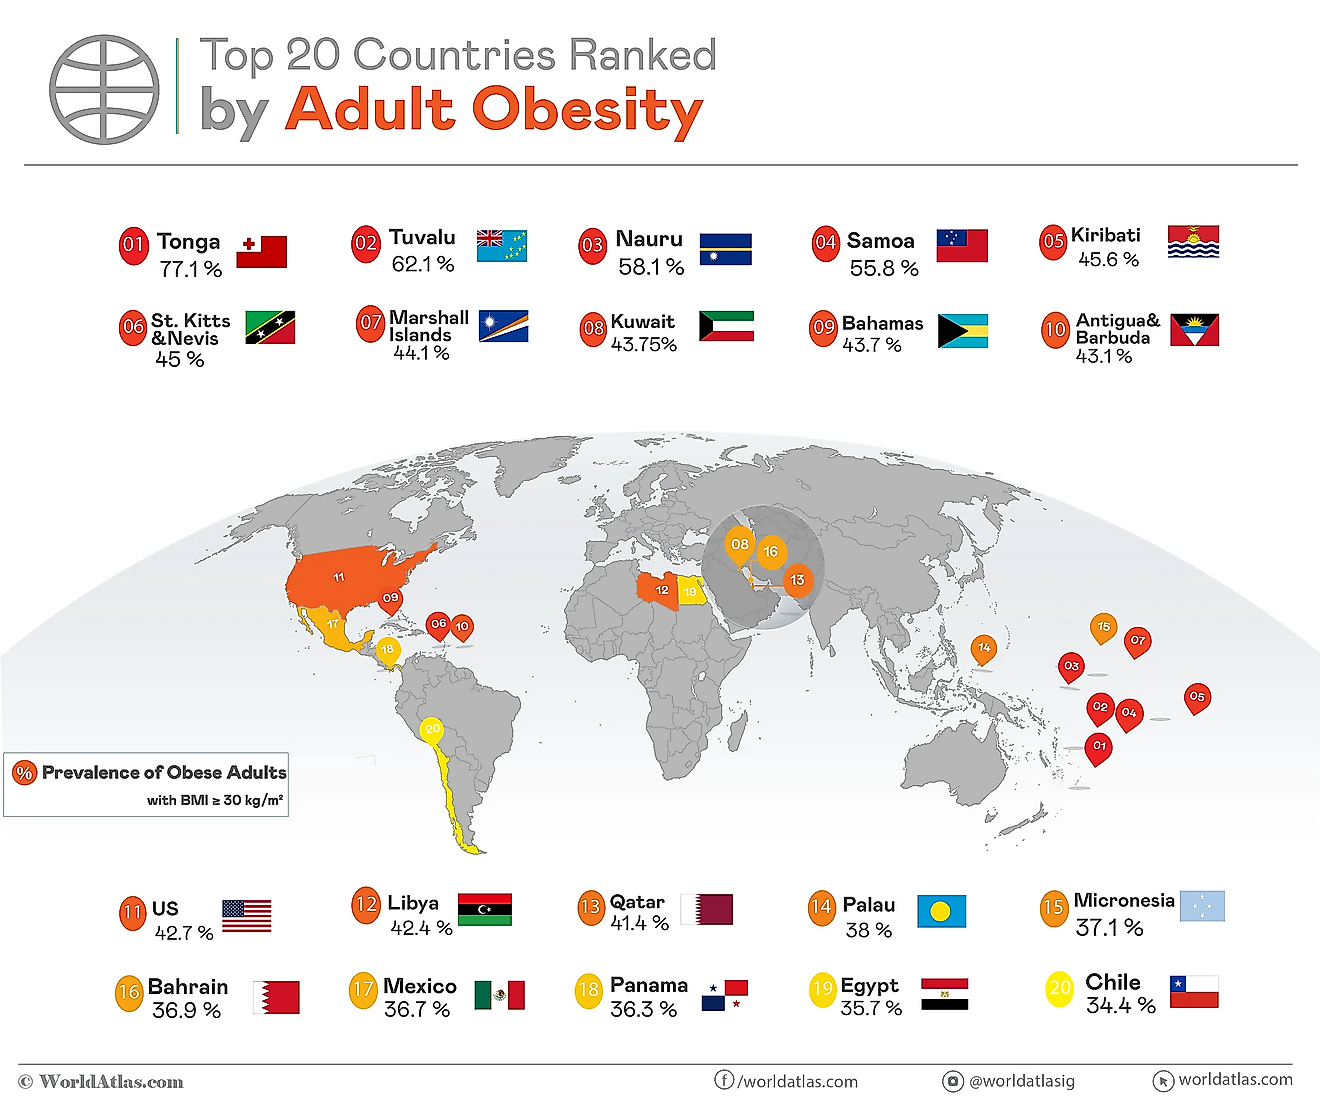 Above is a map of the top 20 countries ranked by adult obesity or the percentage of adults with a BMI above 30 kg/m2.